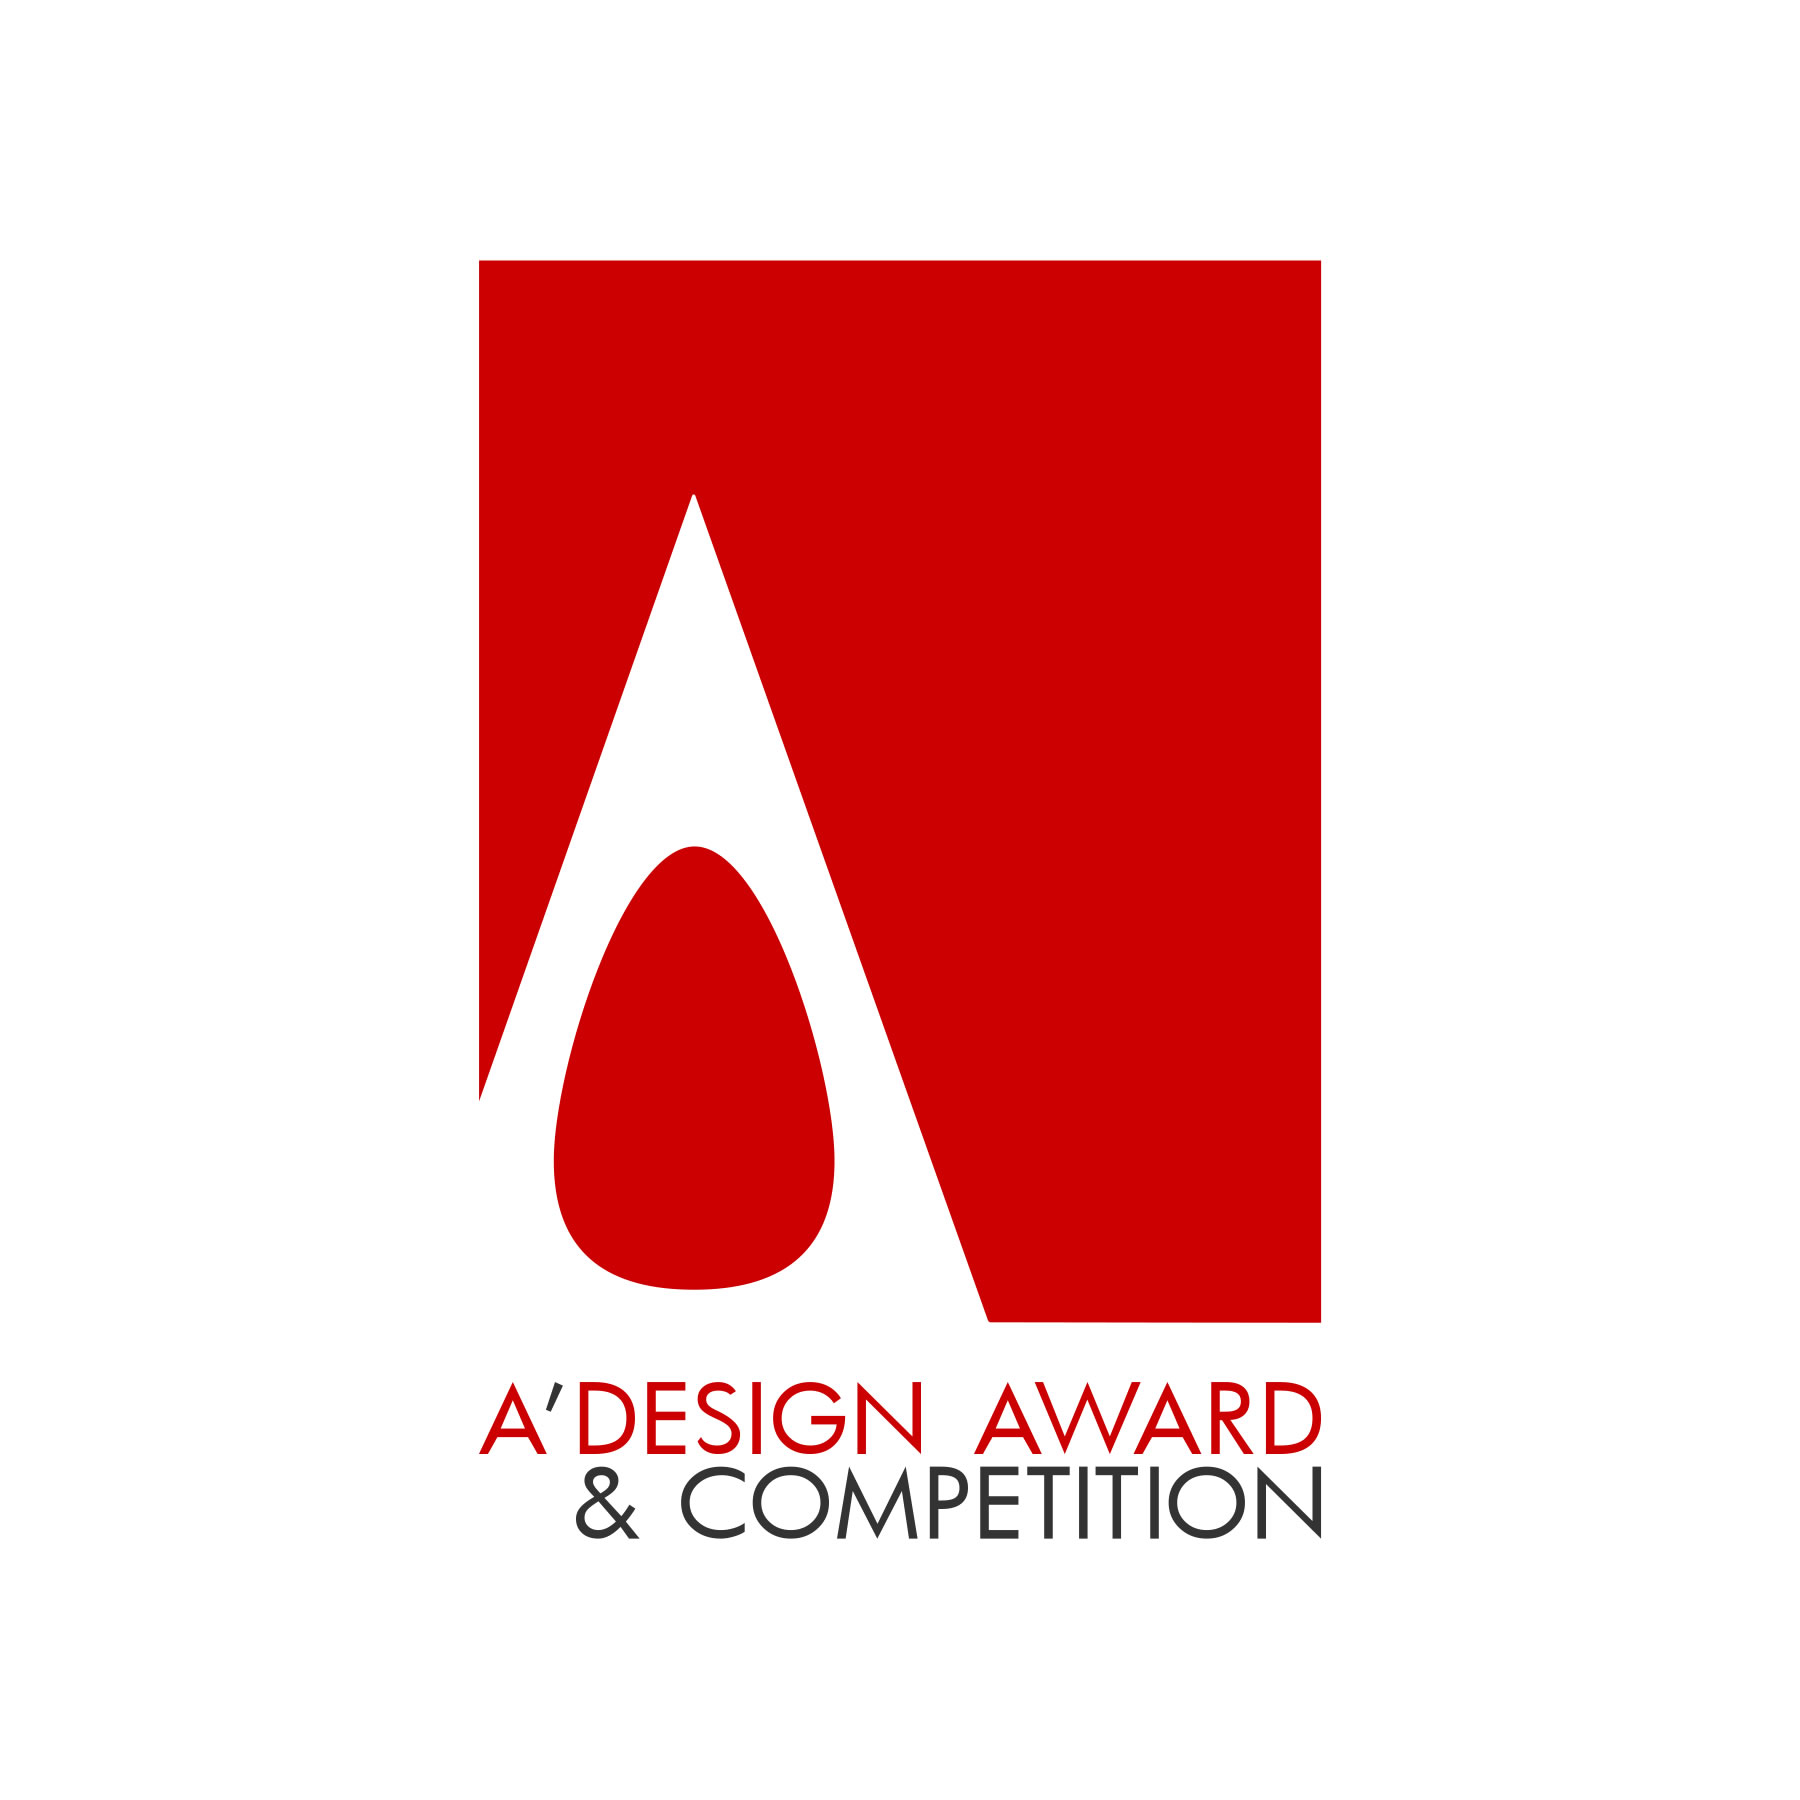 logo of the A' Design Award & Competition